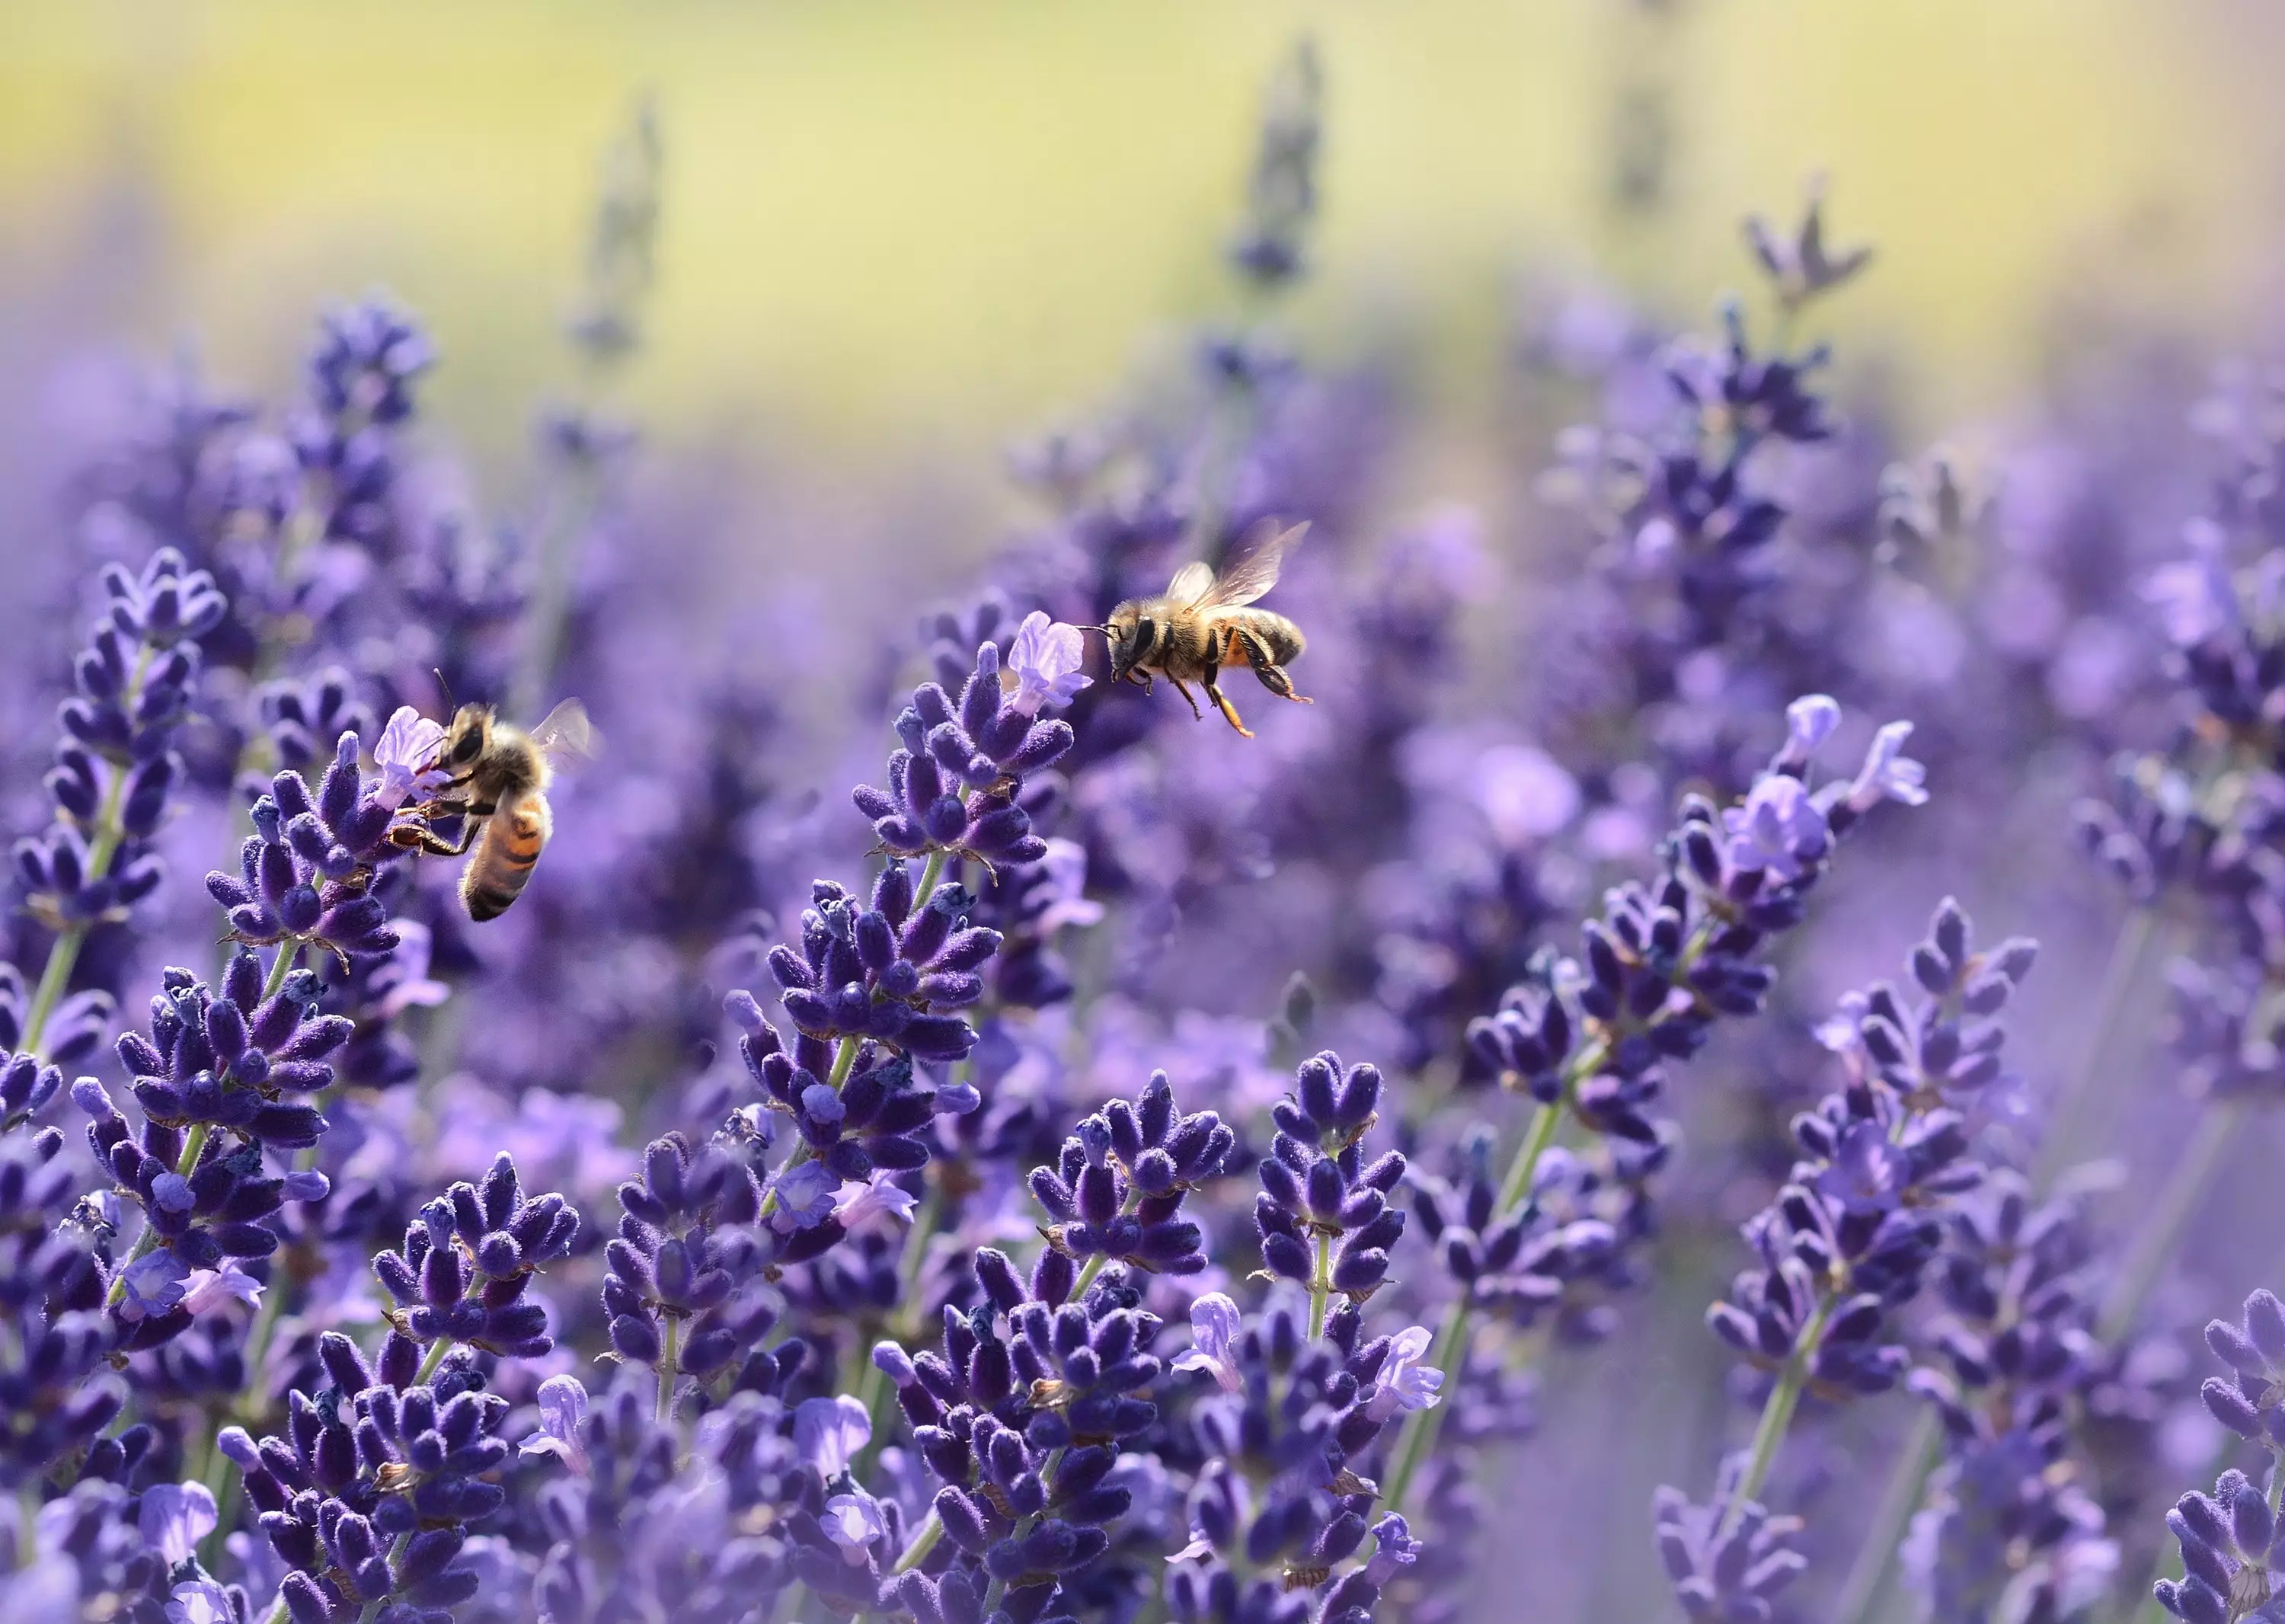 Bees are responsible for 80 per cent of pollination worldwide. (